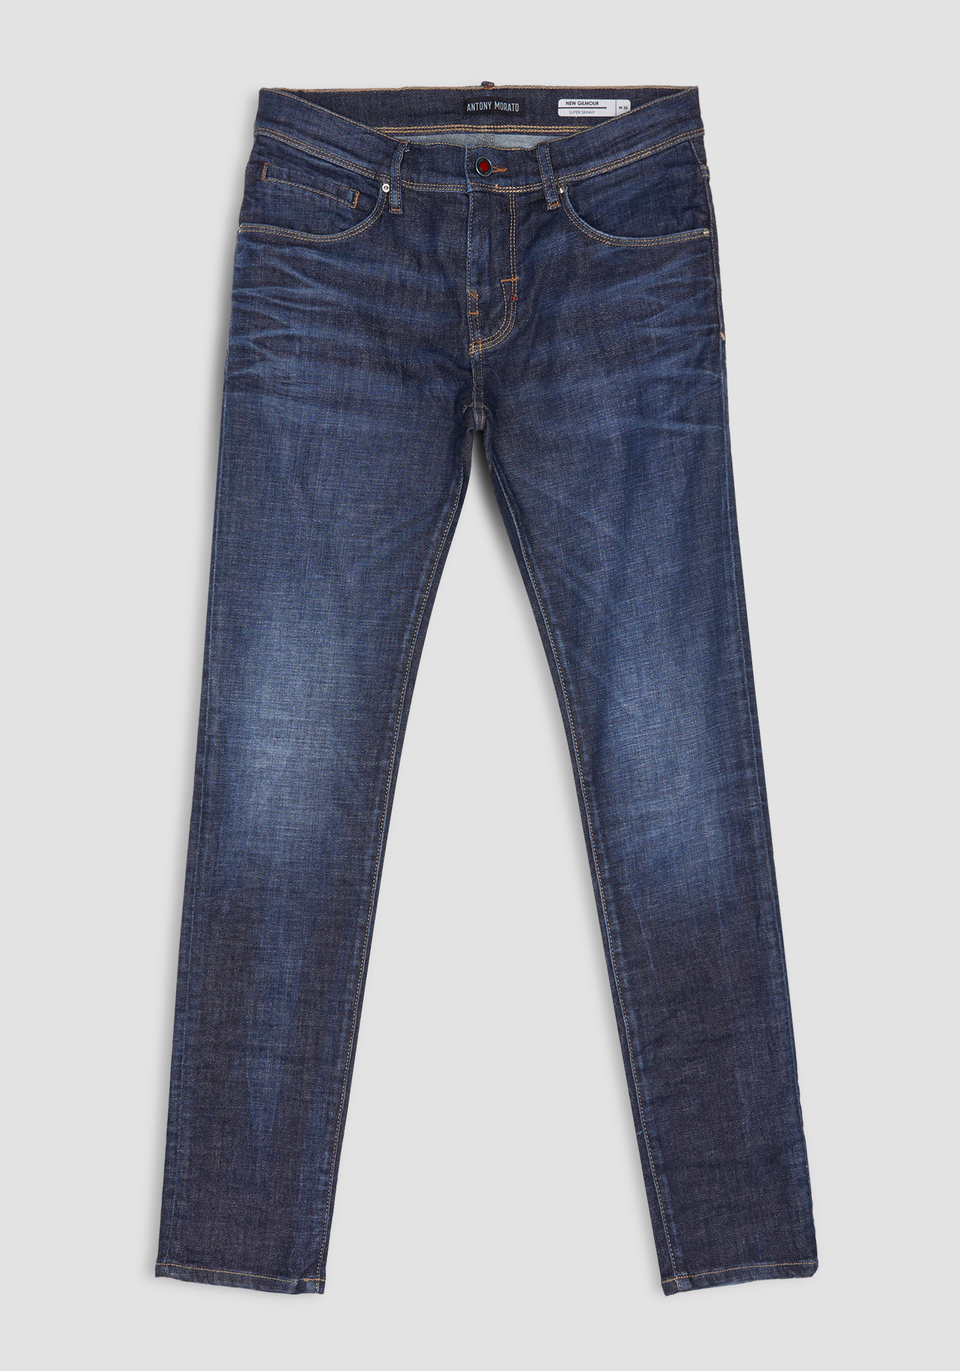 JEANS SUPER SKINNY FIT „GILMOUR“ AUS RECYCELTER BAUMWOLLE - Antony Morato Online Shop